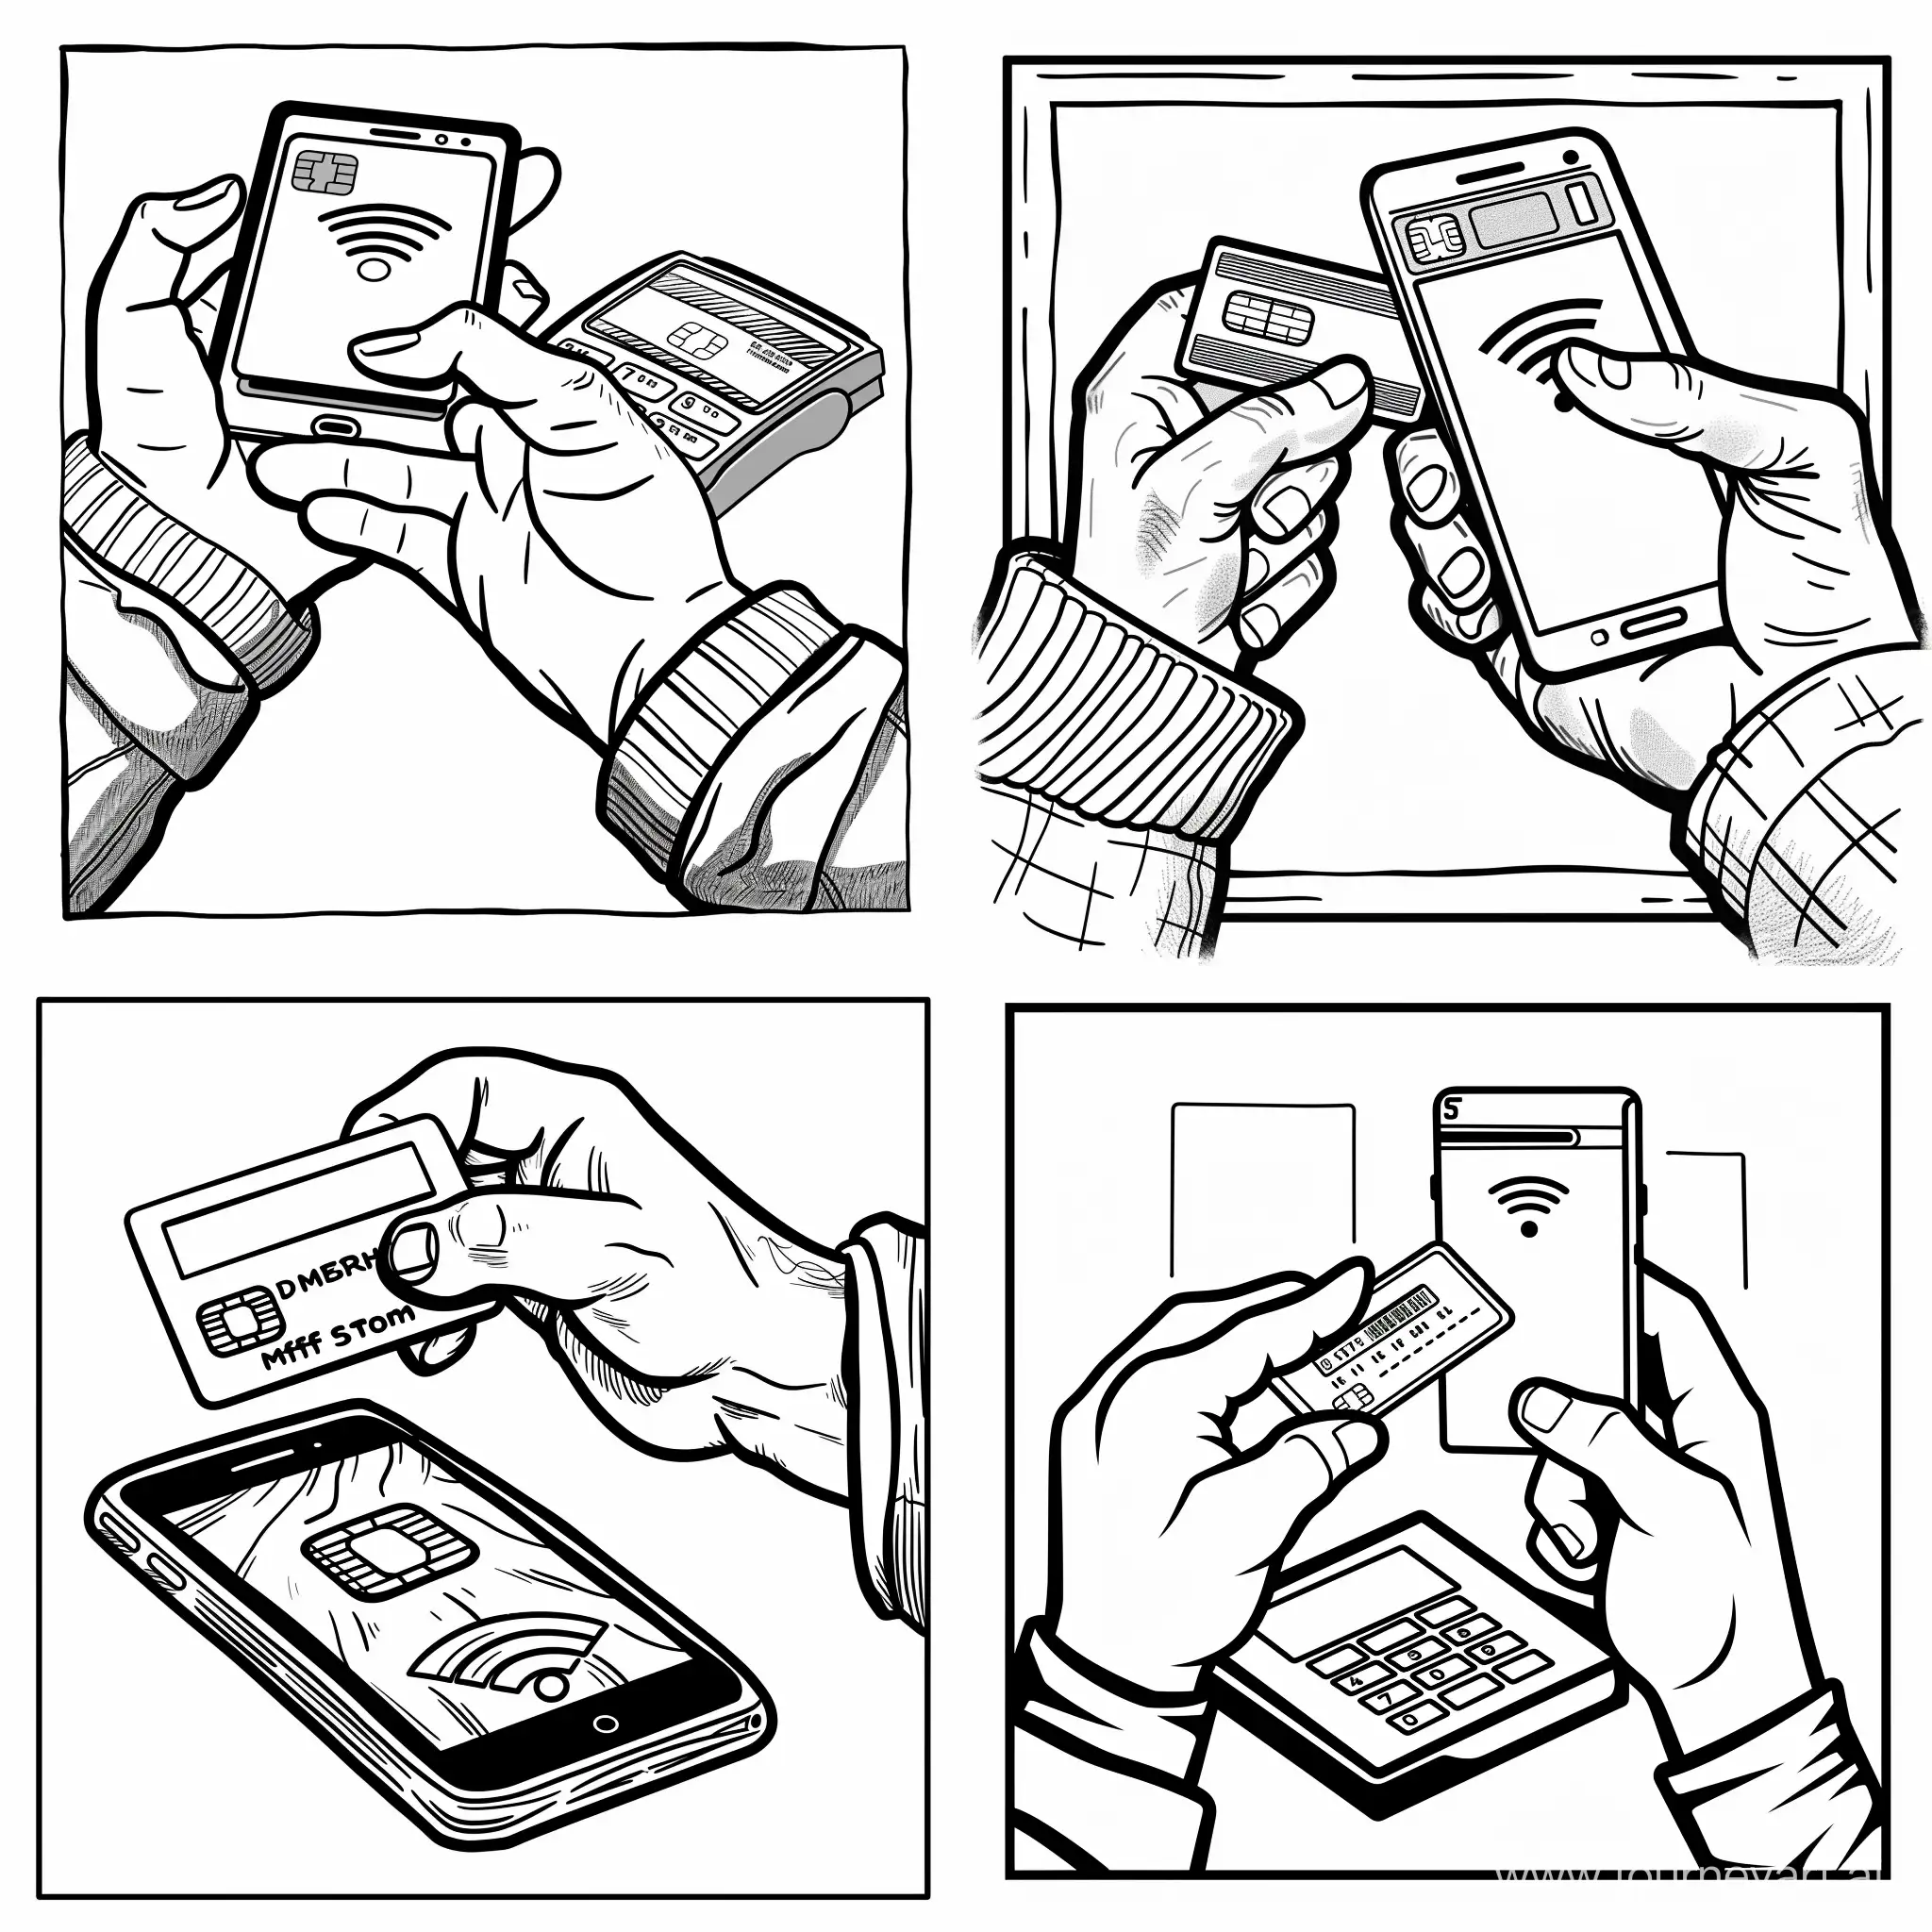 a person holding a credit card in their hand, lineart, by Matthias Stom, wifi icon, ffffound, rhythm, coloring page, square, corrected hand, scanning items with smartphone, monochrome